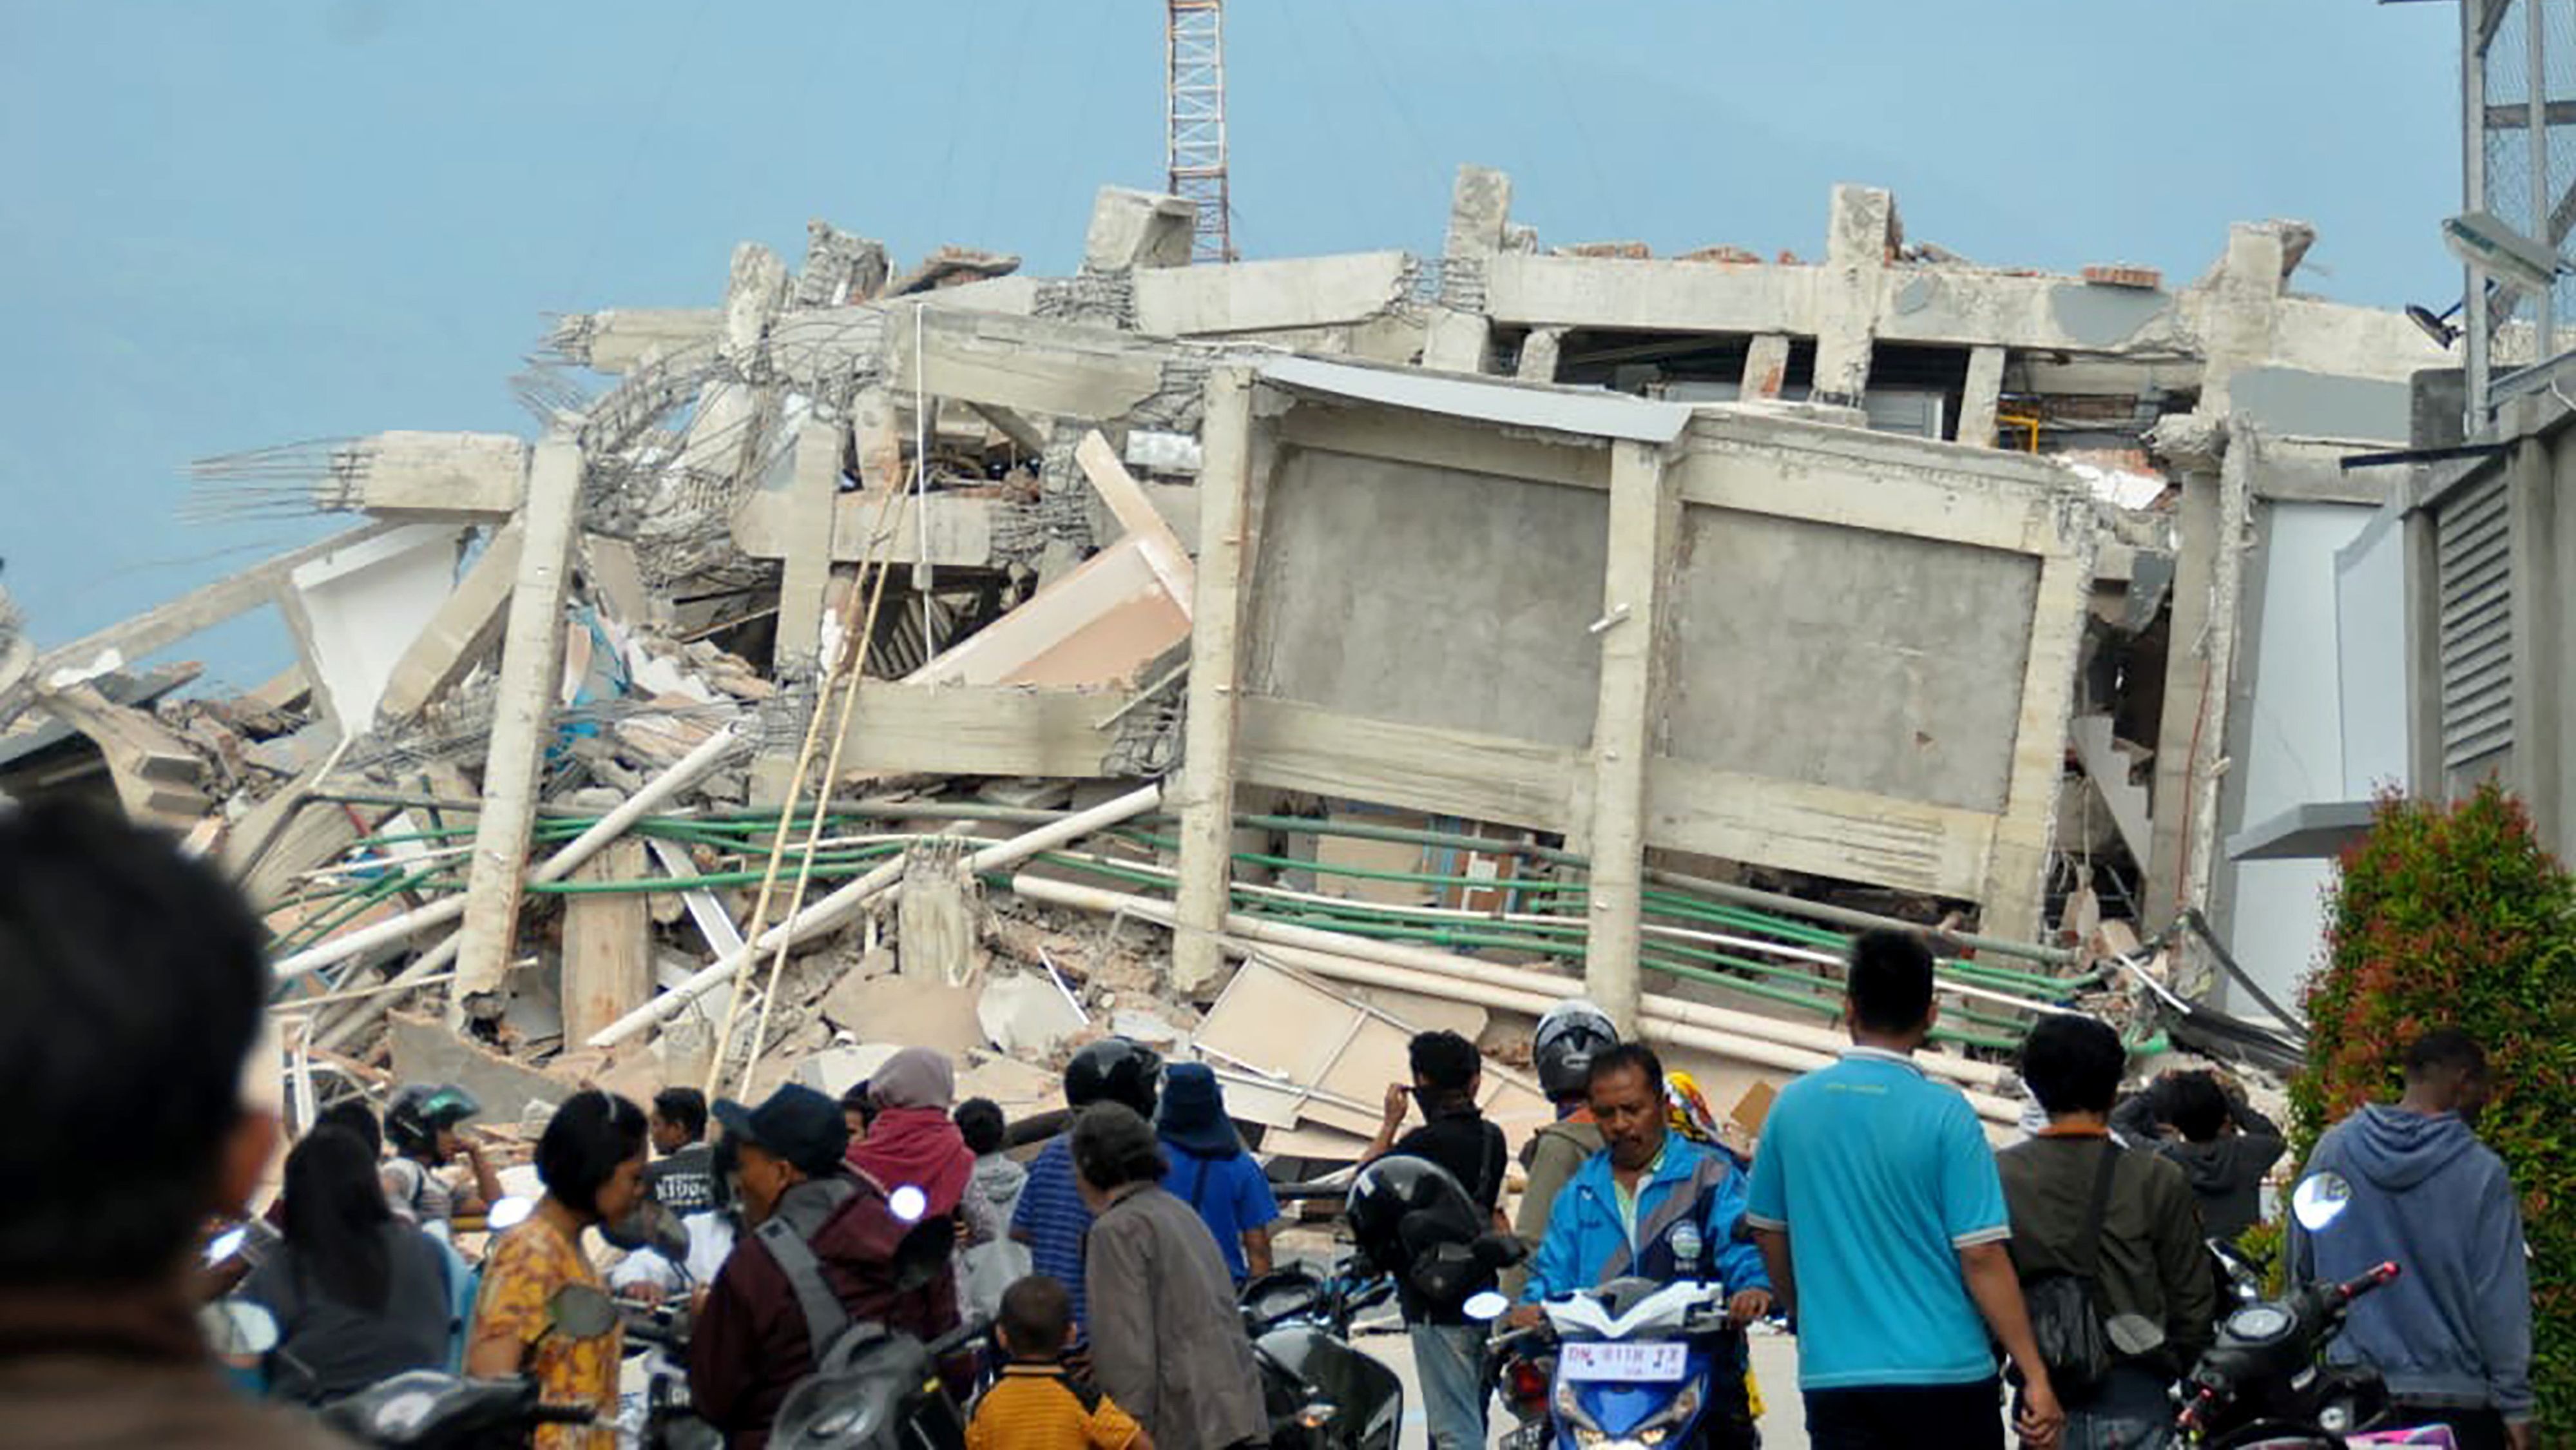 Palu residents gather to look at a collapsed building in the aftermath of the quake and tsunami.